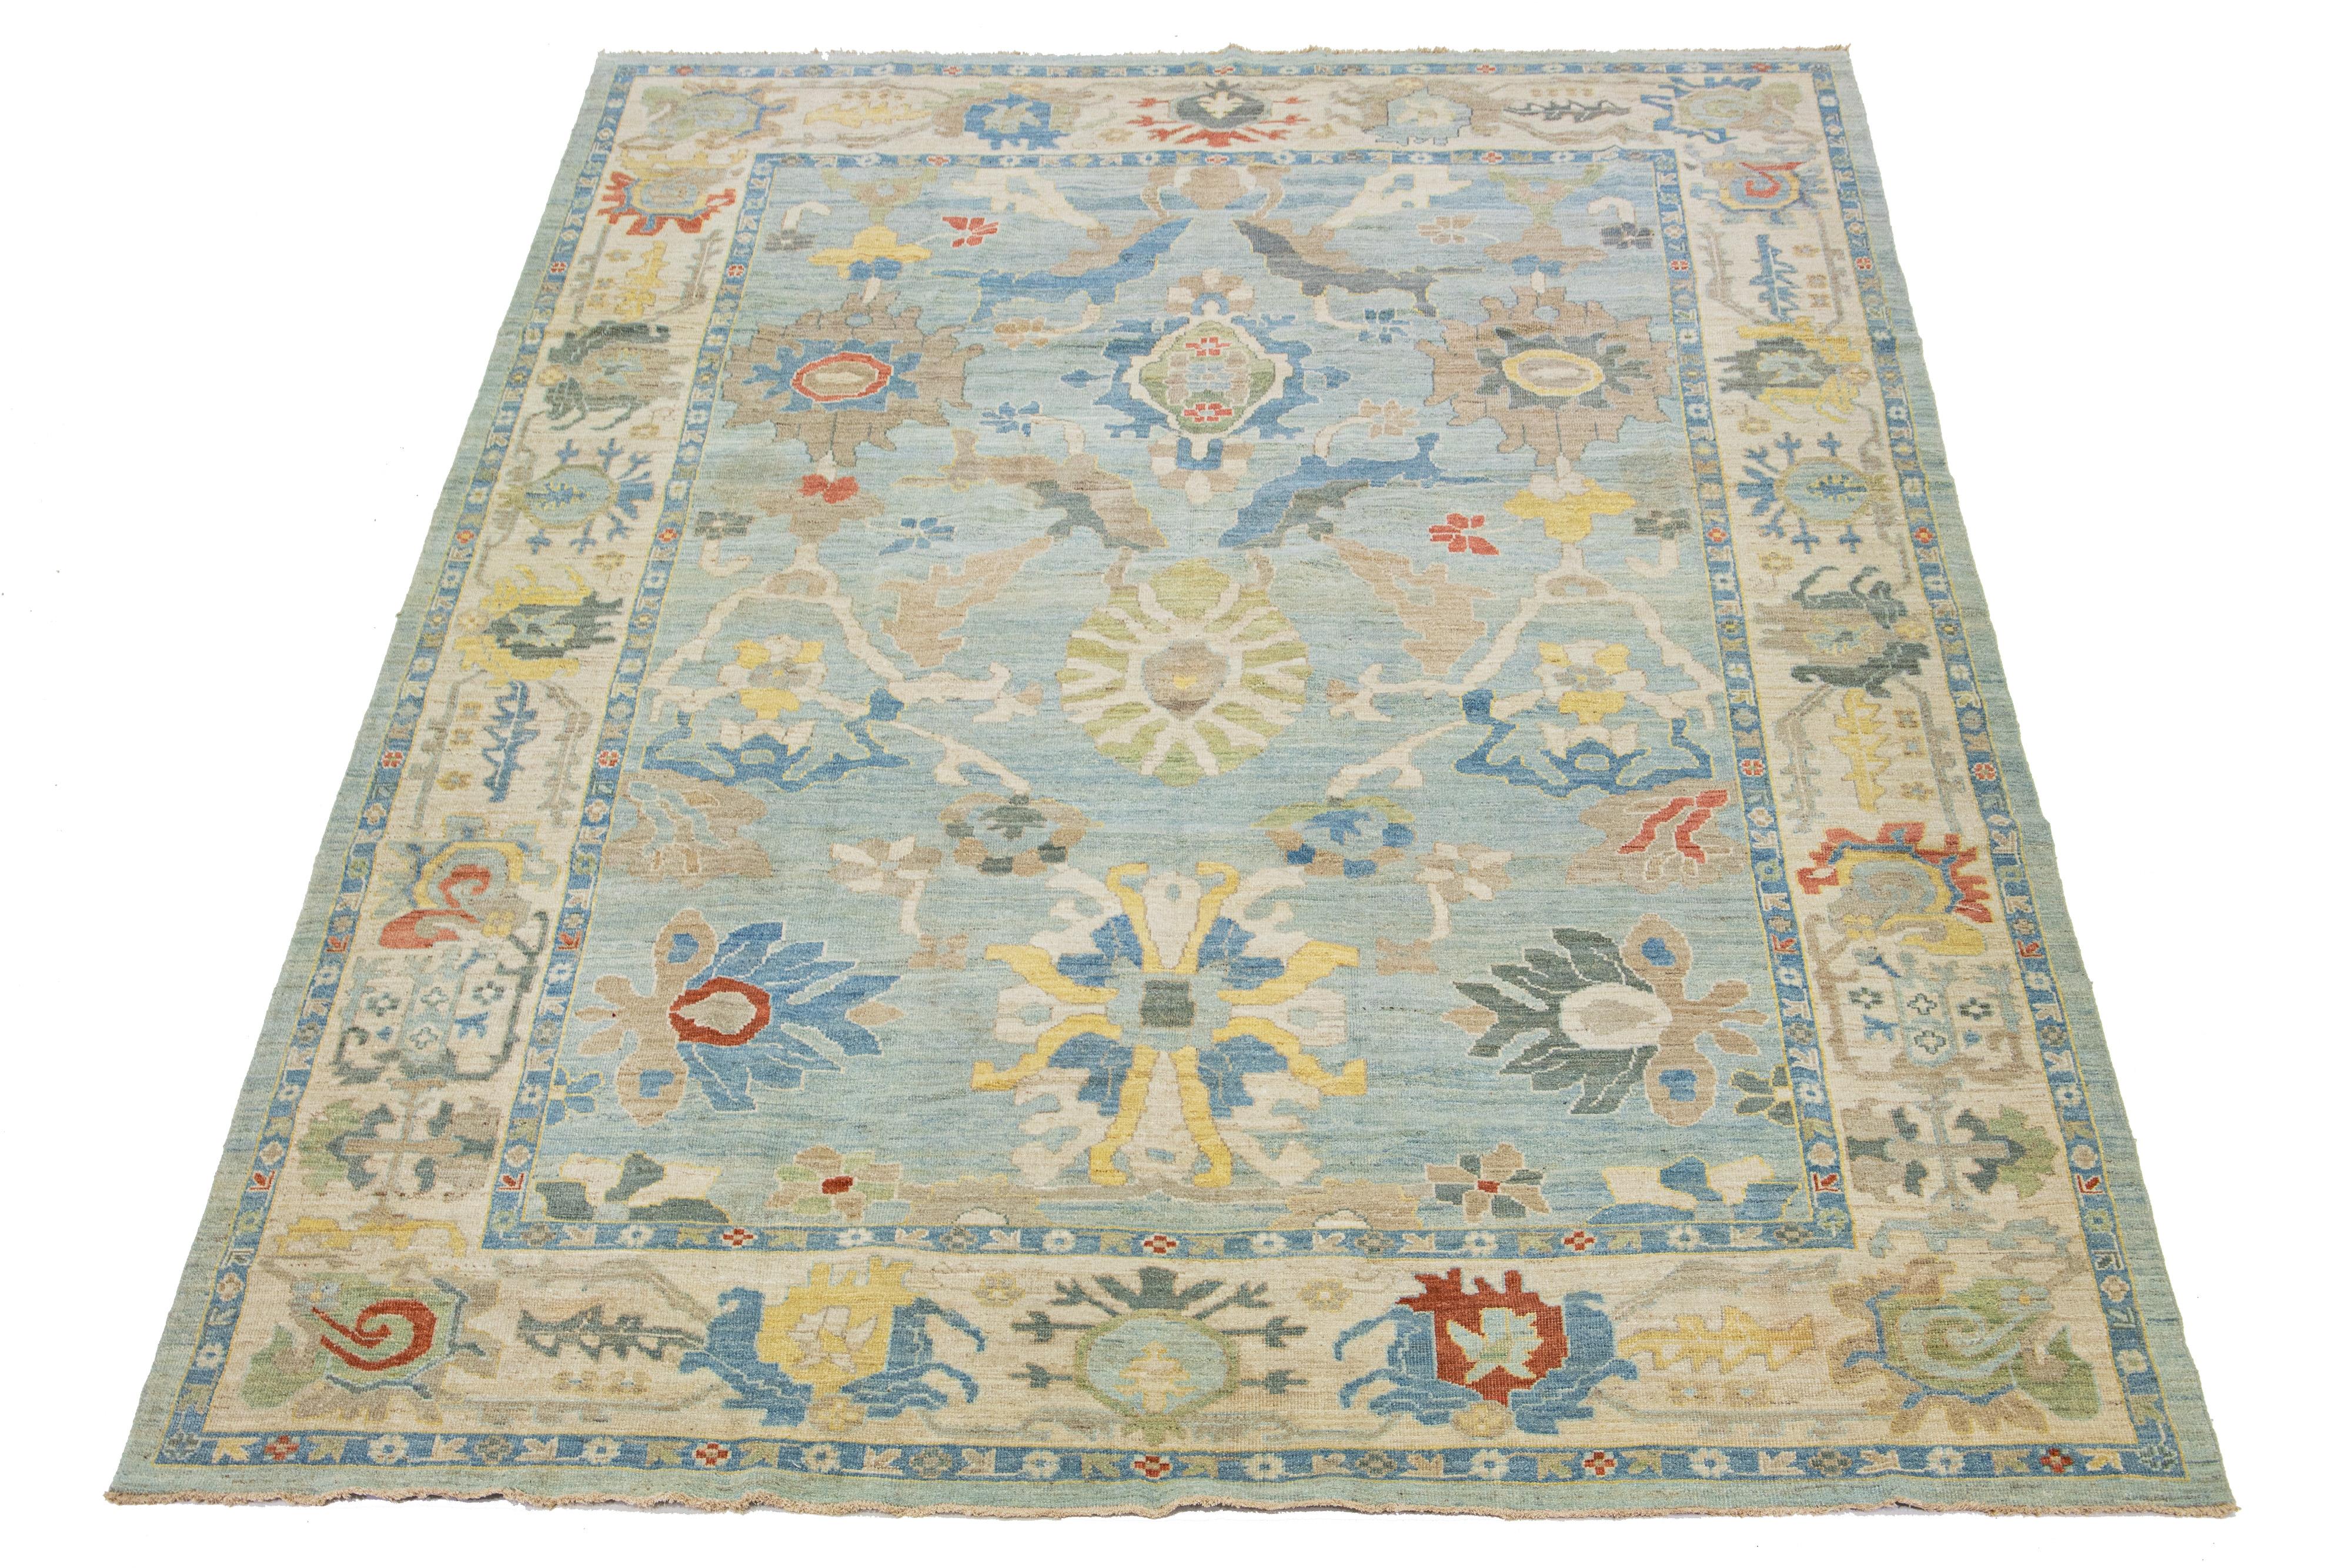 Beautiful modern Sultanabad hand-knotted wool rug with a blue field. This Sultanabad rug has a beige frame and multicolor accents in a gorgeous all-over classic floral pattern design.

This rug measures 10'2